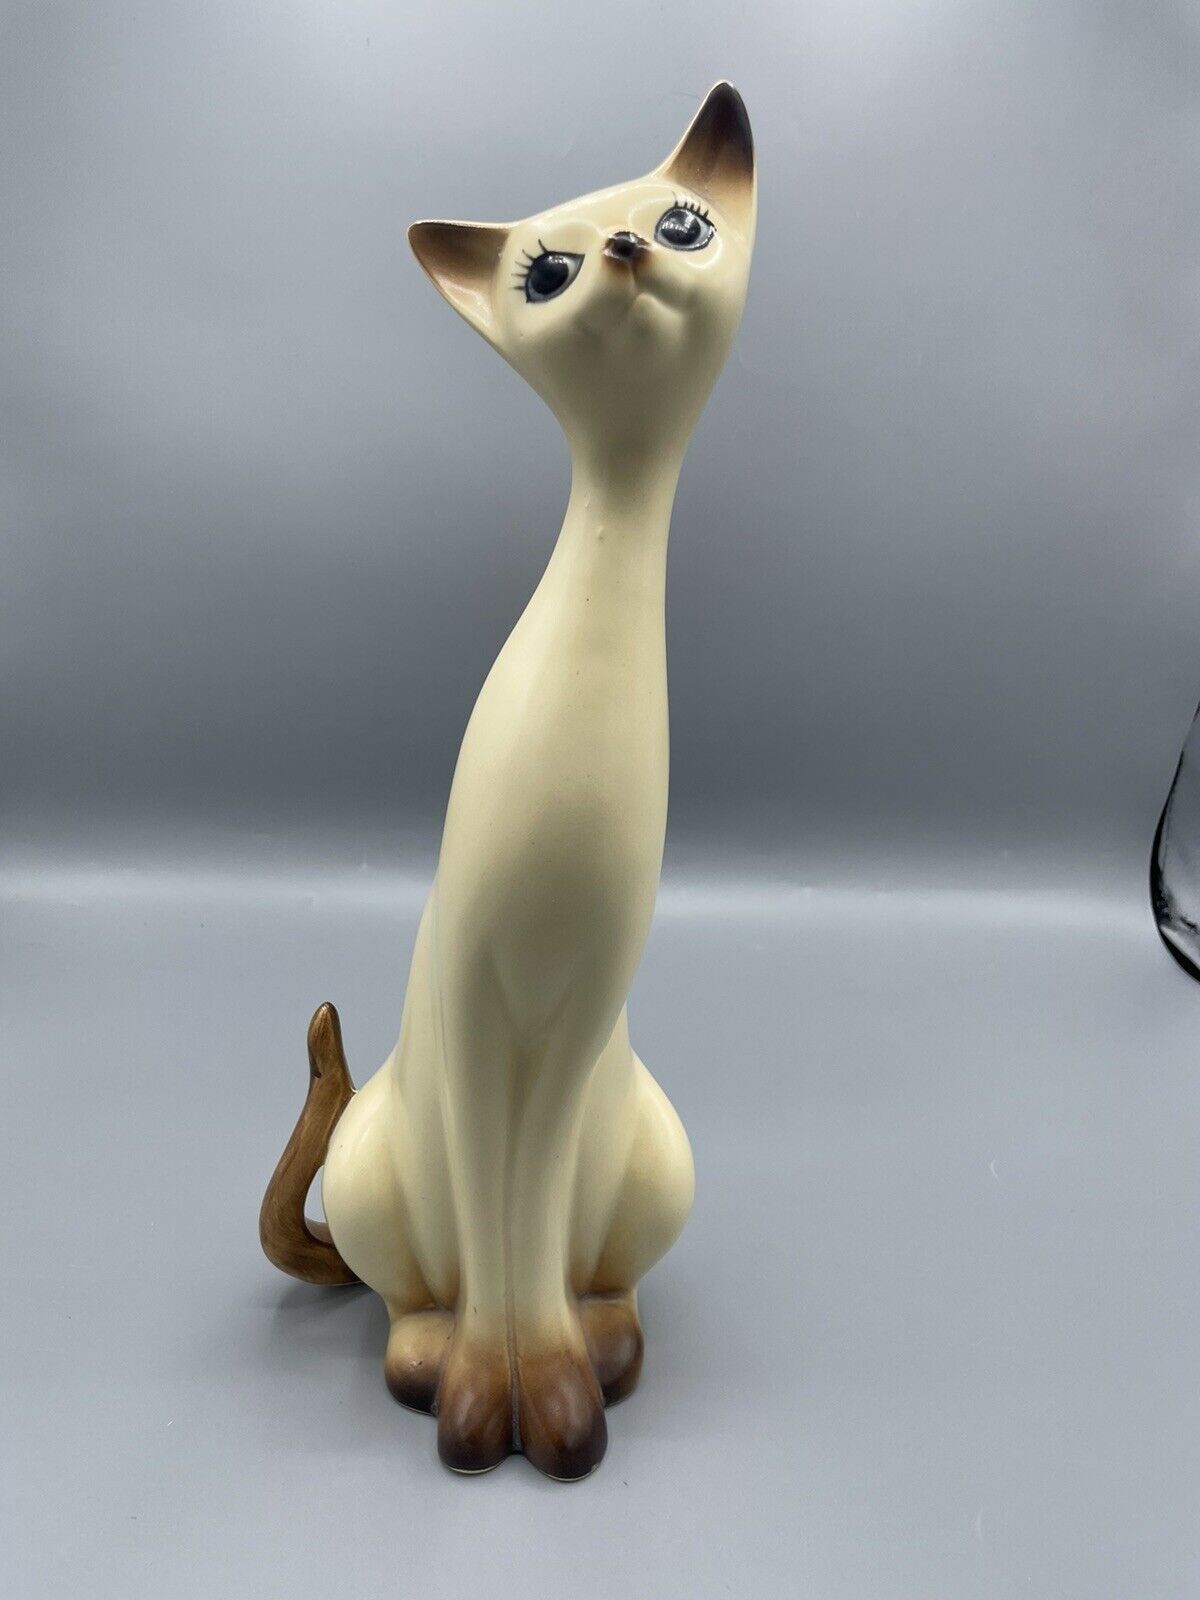 Atomic MCM Napcoware Siamese Cat Statue Tall Long Neck Vintage Kitschy